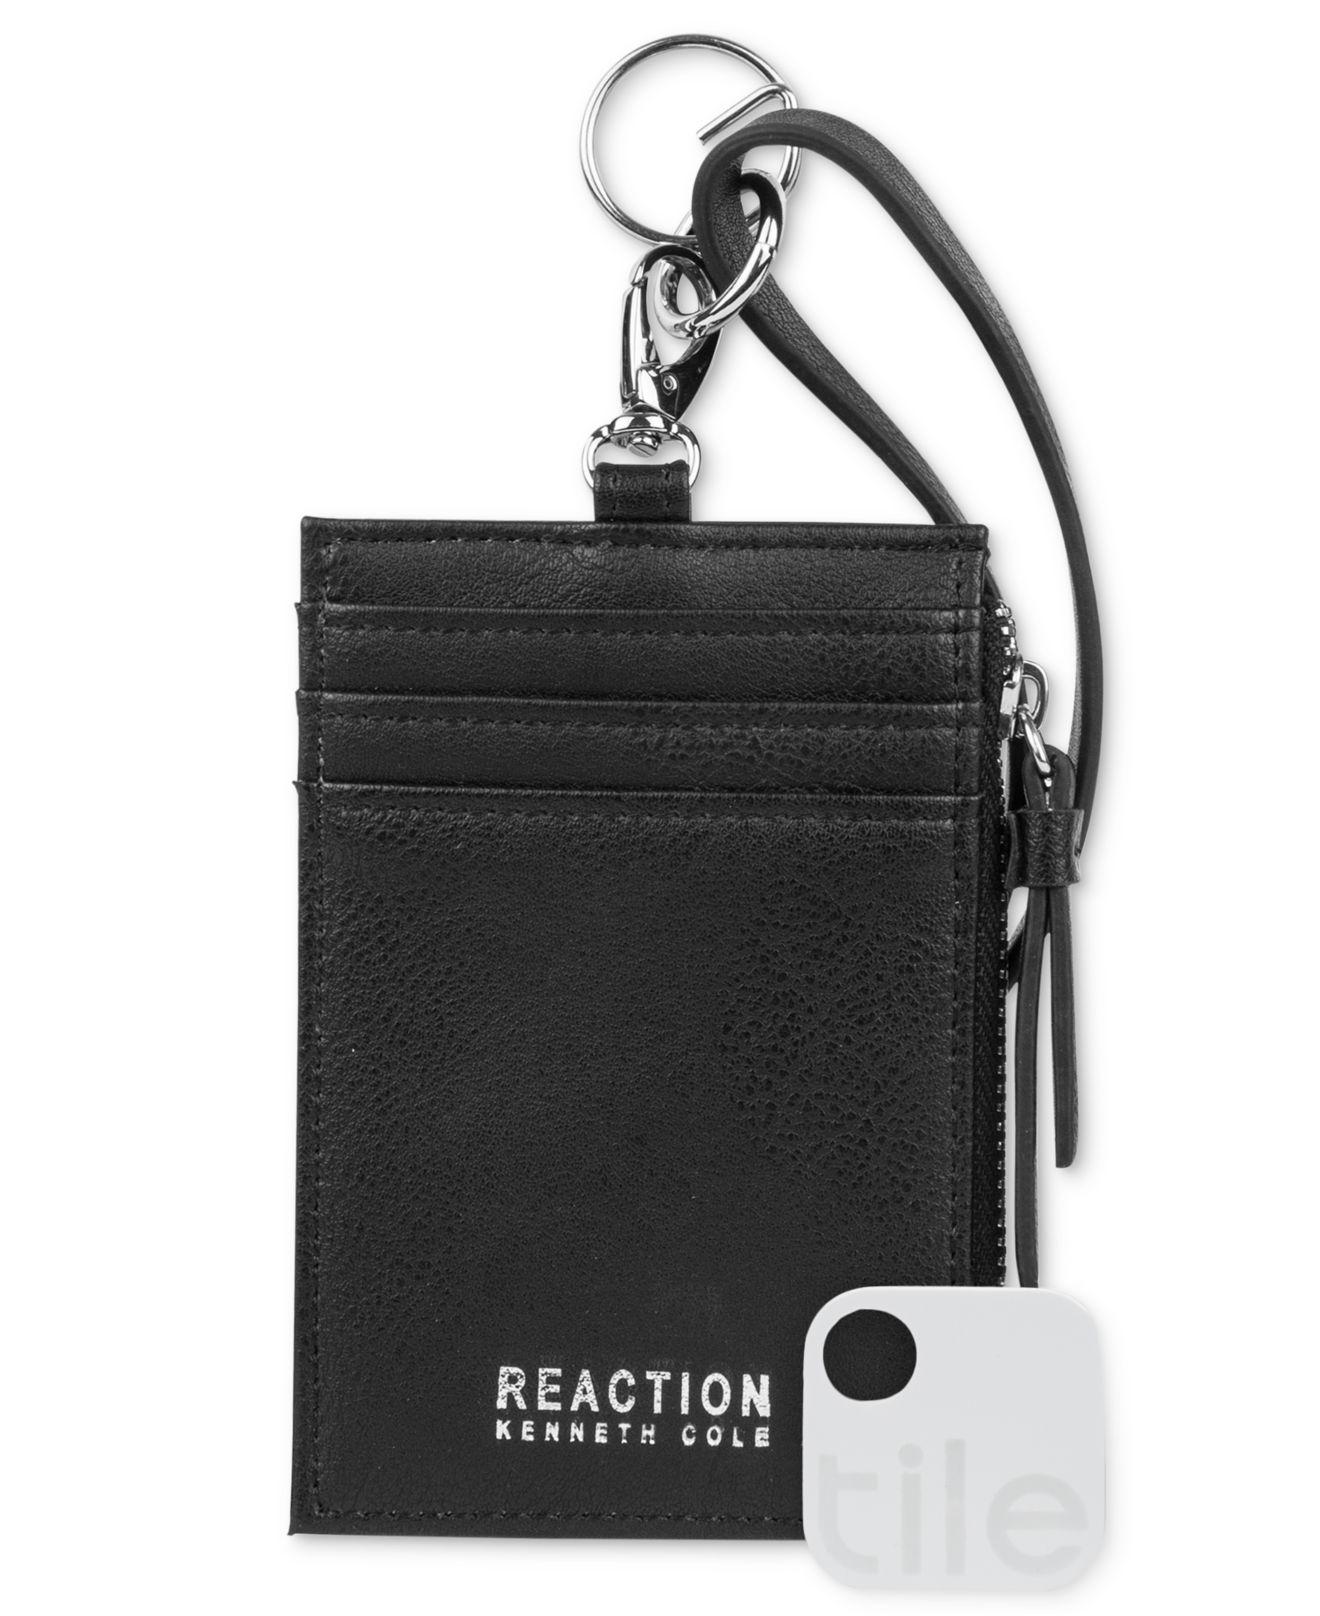 Lyst - Kenneth Cole Reaction Lanyard Wallet With Tracker in Black for Men